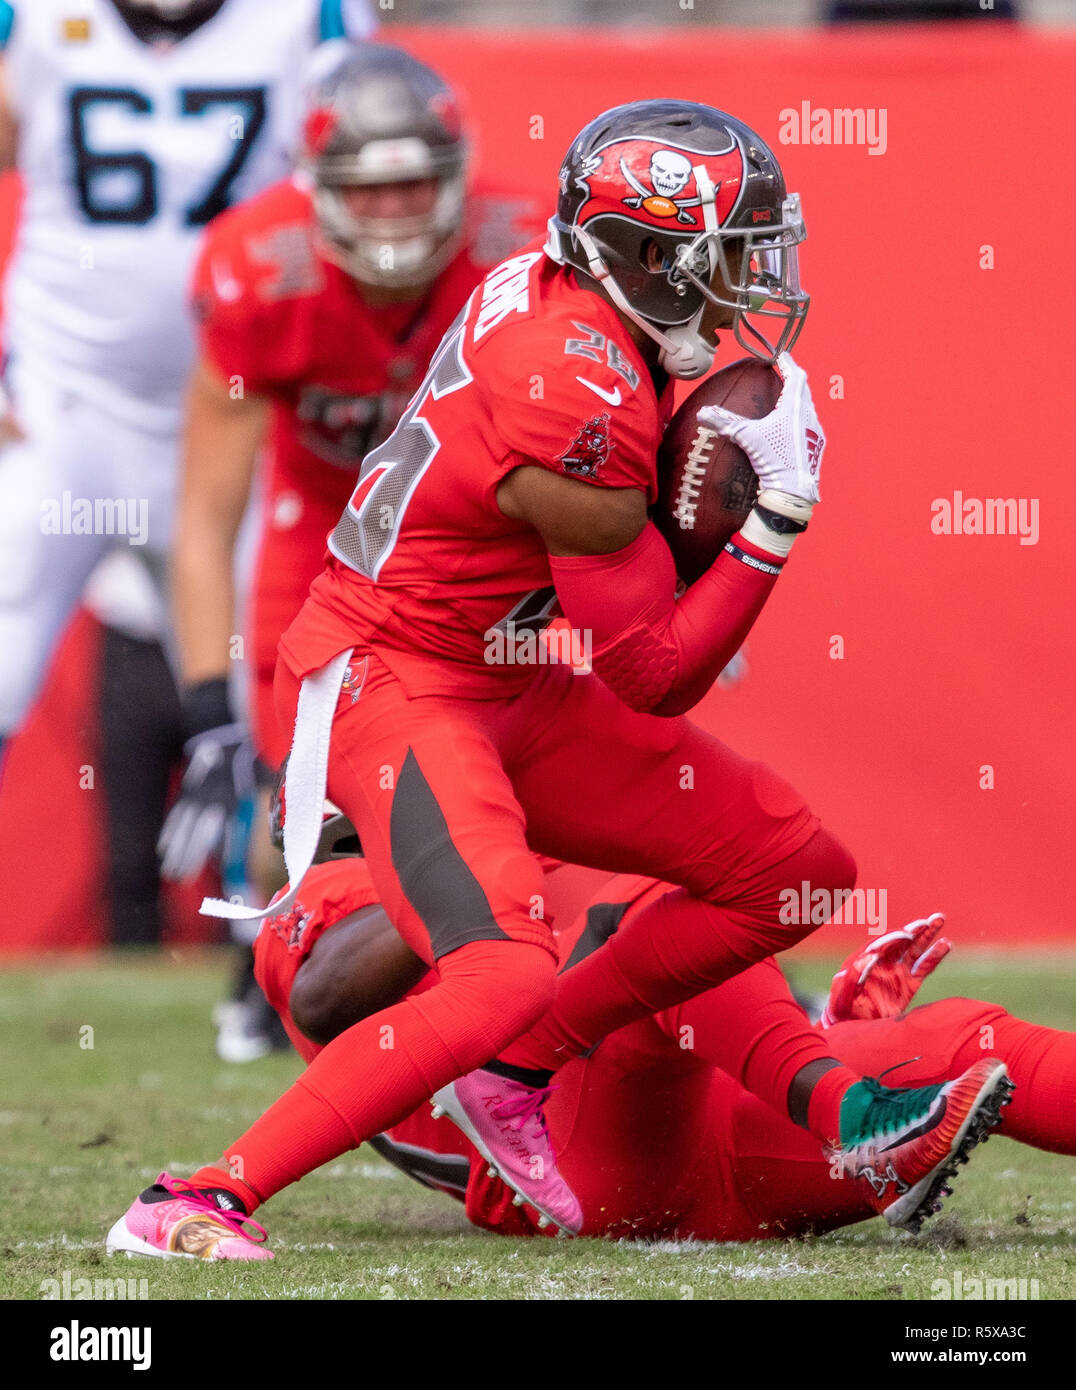 Tampa, Florida, USA. 02nd Dec, 2018. Tampa Bay Buccaneers defensive back Andrew Adams (26) with an interception in the 1st quarter during the game between the Carolina Panthers and the Tampa Bay Buccaneers at Raymond James Stadium in Tampa, Florida. Del Mecum/CSM/Alamy Live News Stock Photo